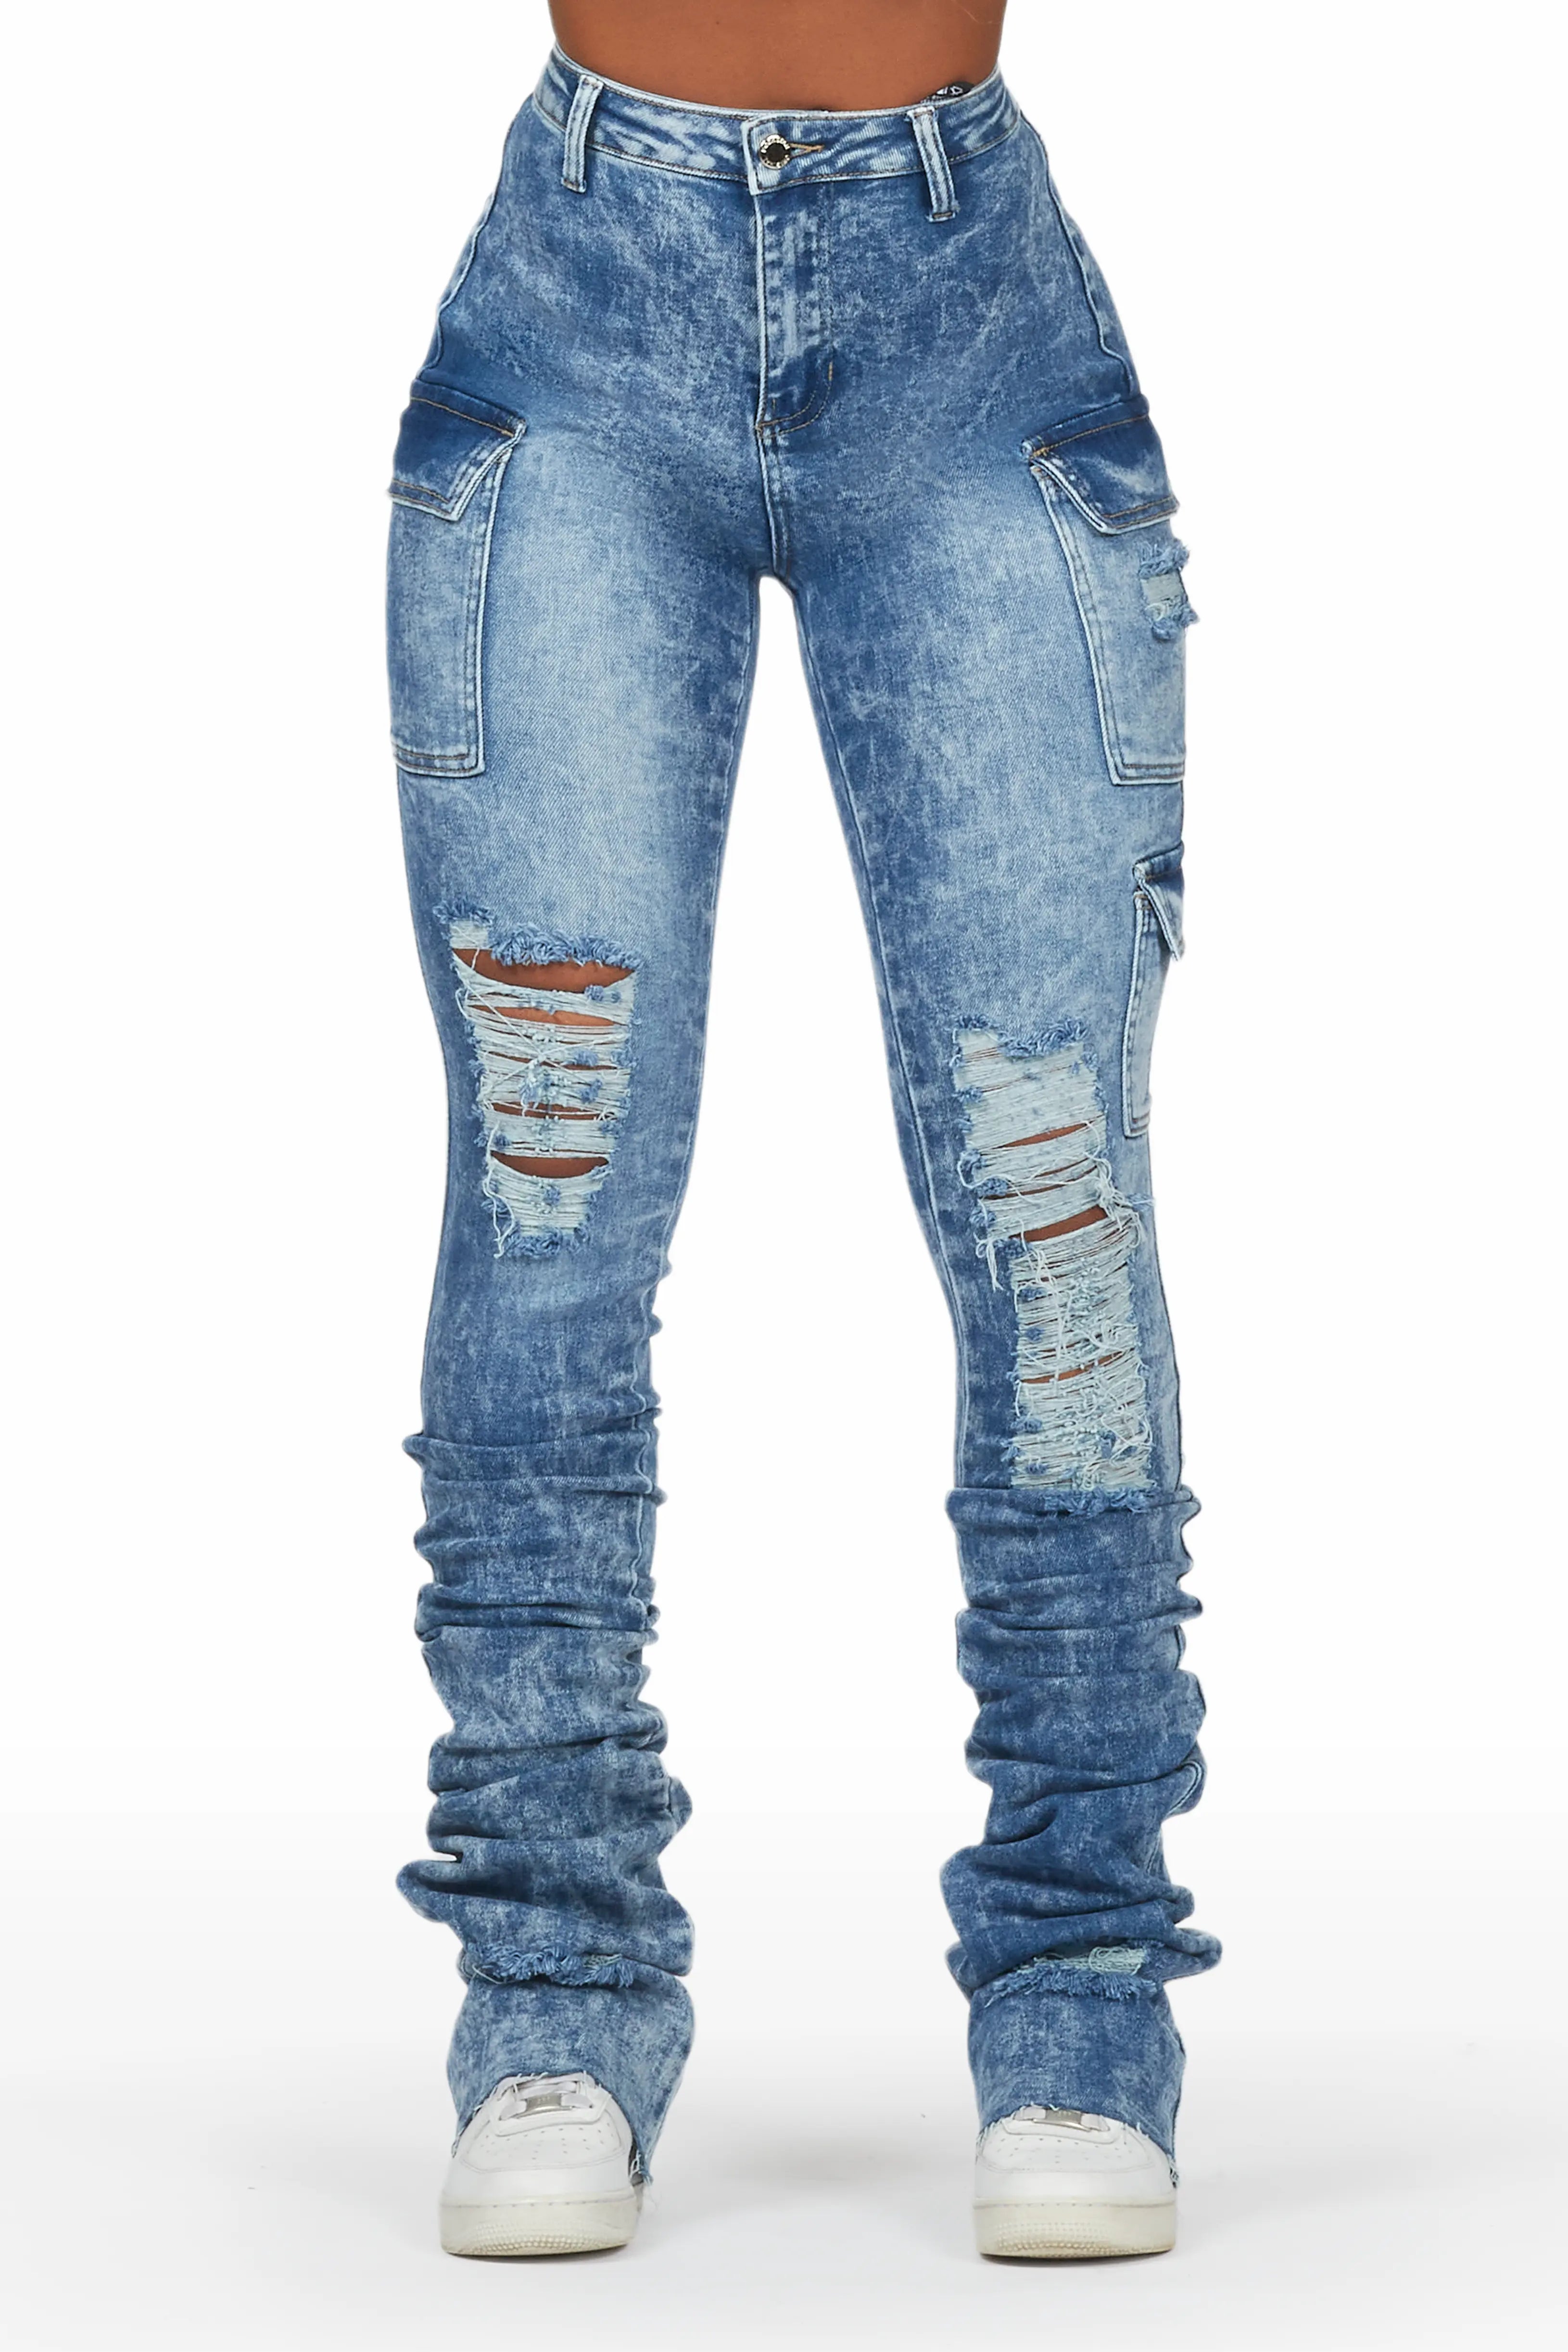 Women's Stacked Jeans: Ripped, Skinny, High and Low Waist Stacked Jeans